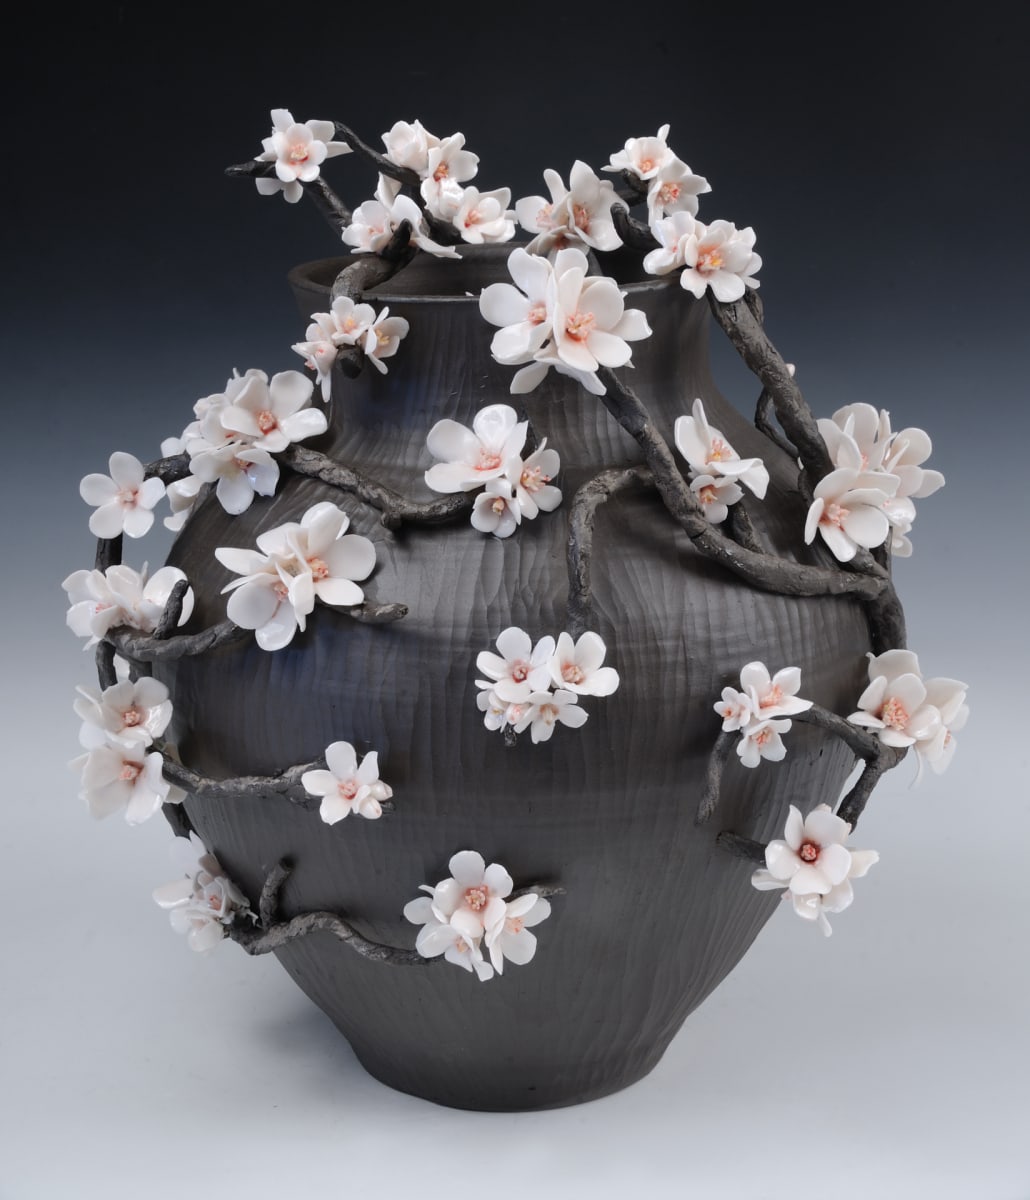 Resilient by Christy Boltersdorf  Image: Black vines encircling black stoneware vase with porcelain cherry blossoms emerging from the vines.